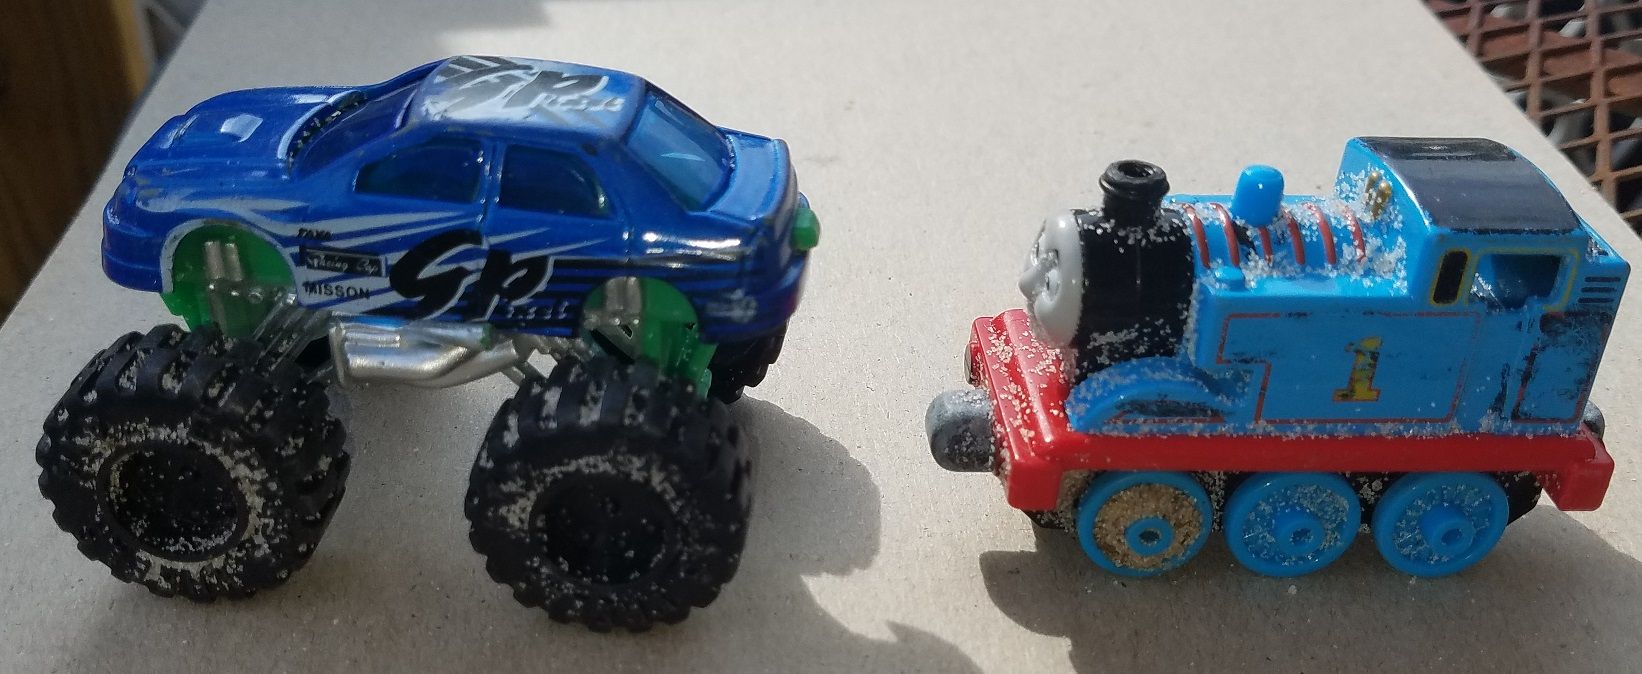 20160705 4x4 car and Thomas the Train both found in the Biloxi dry sand with the Bounty Hunter Quick Silver.